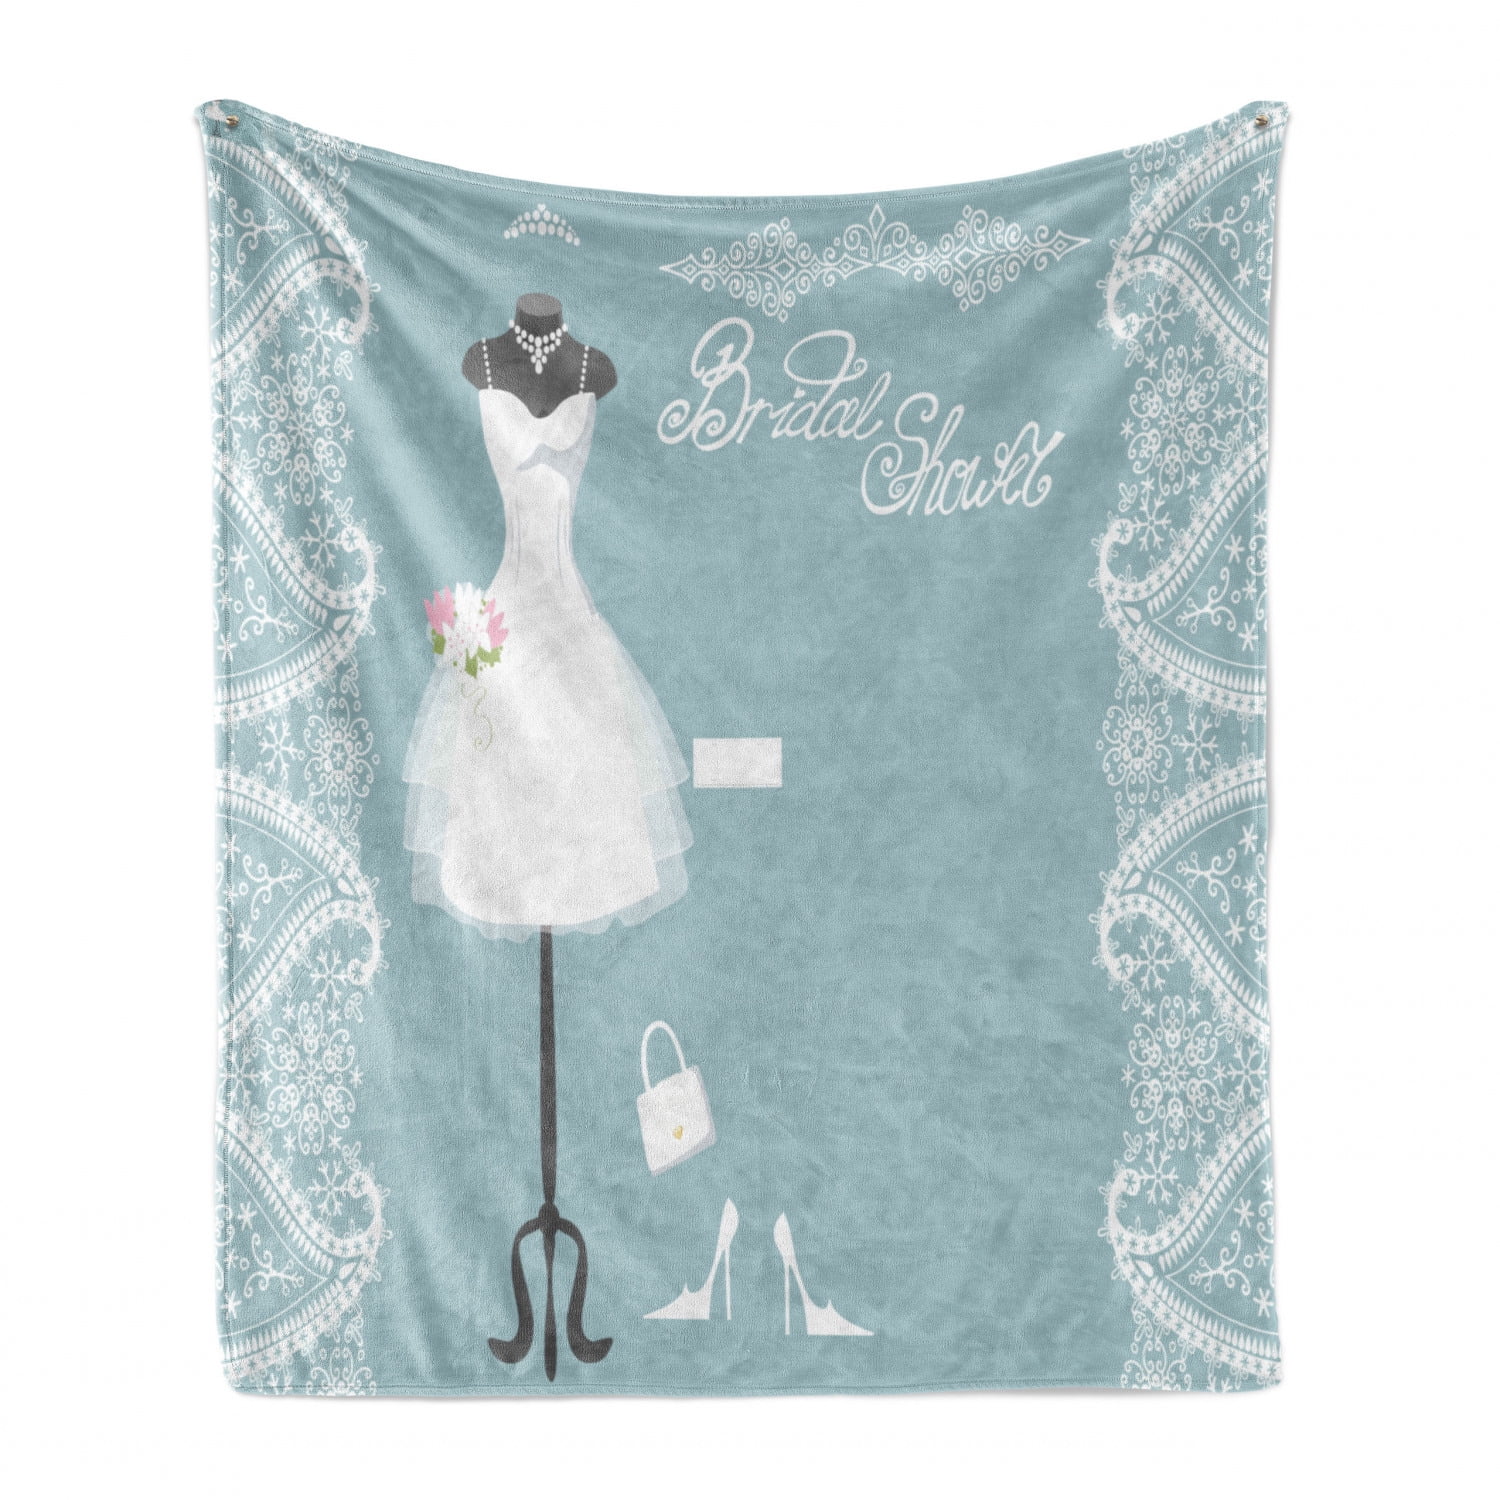 Vintage French Inspired Bride Dress with Floral Frames Desiign Print Ambesonne Bridal Shower Soft Flannel Fleece Throw Blanket Cozy Plush for Indoor and Outdoor Use Baby Blue and White 50 x 70